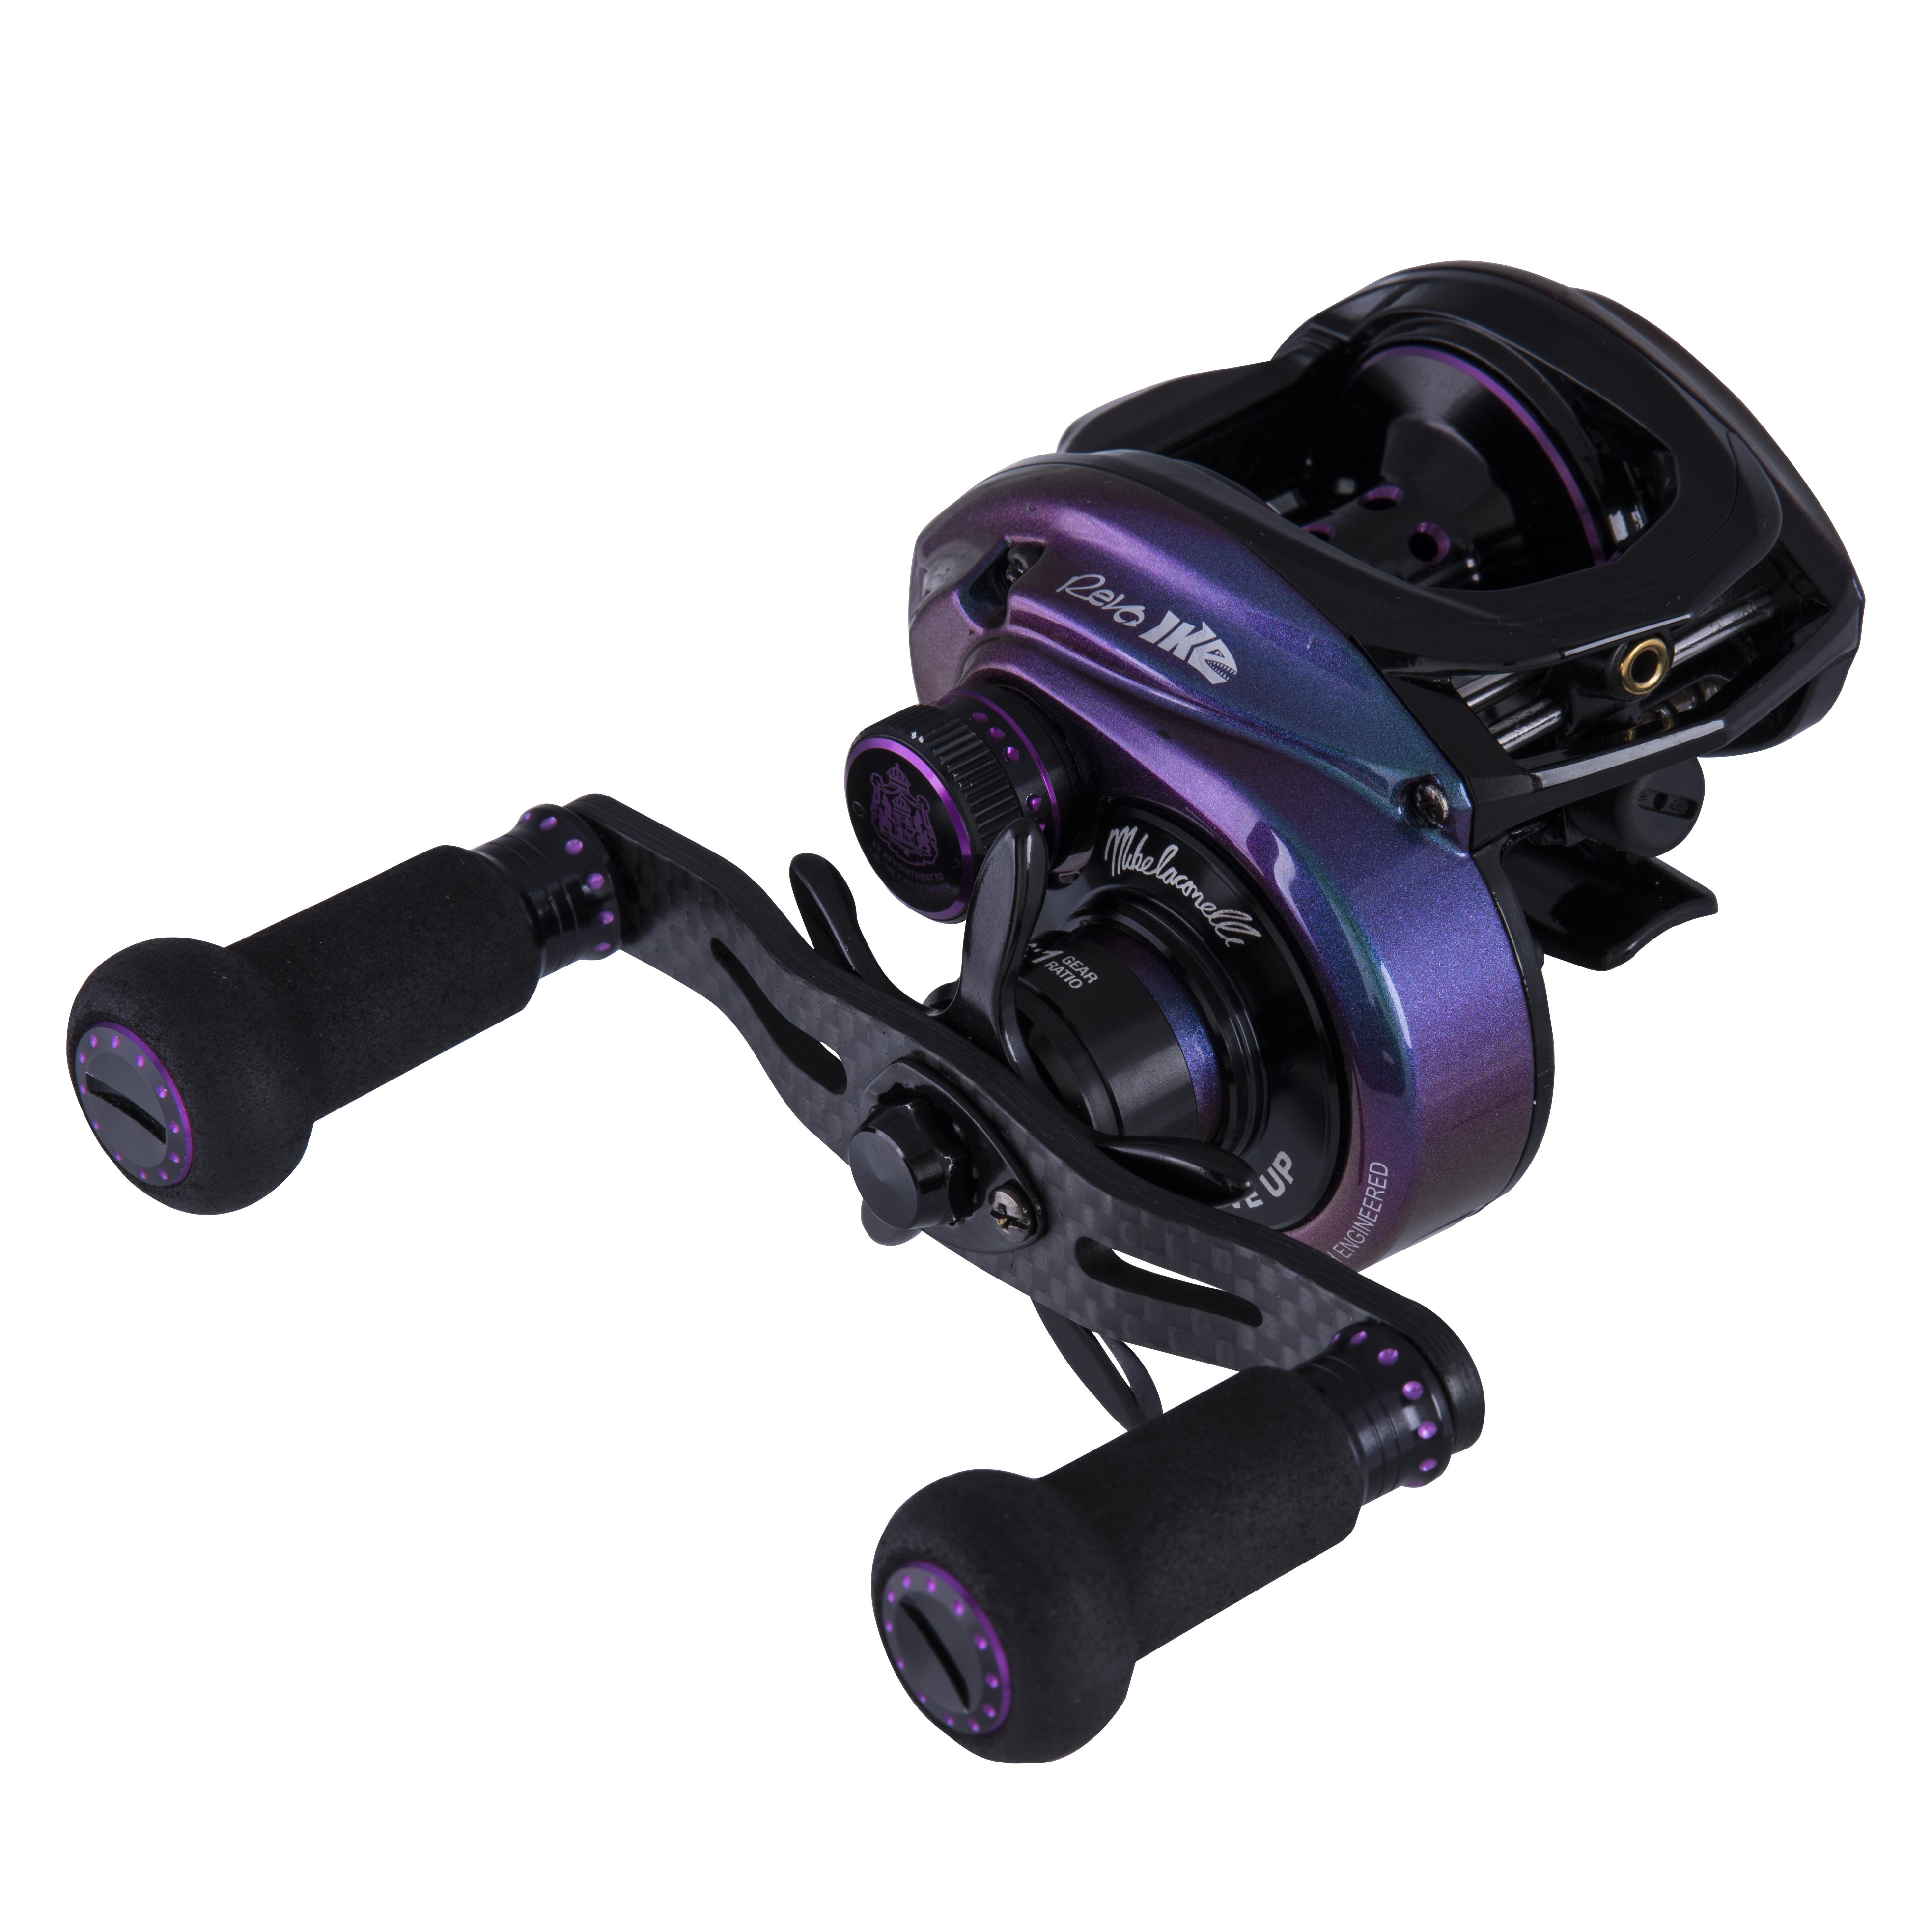 Ike Signature Series Low Profile Baitcast Reel<br>
Abu Garcia<br>
$149.95<br>
Mike Iaconelli, one of the most recognized professional freshwater bass anglers, and Abu Garcia have teamed up to create a unique series of Ike designed products tailored to the avid bass angler. The new Abu Garcia Revo Ike Series low profile reels are designed with two gear ratios to cover different fishing techniques. 		